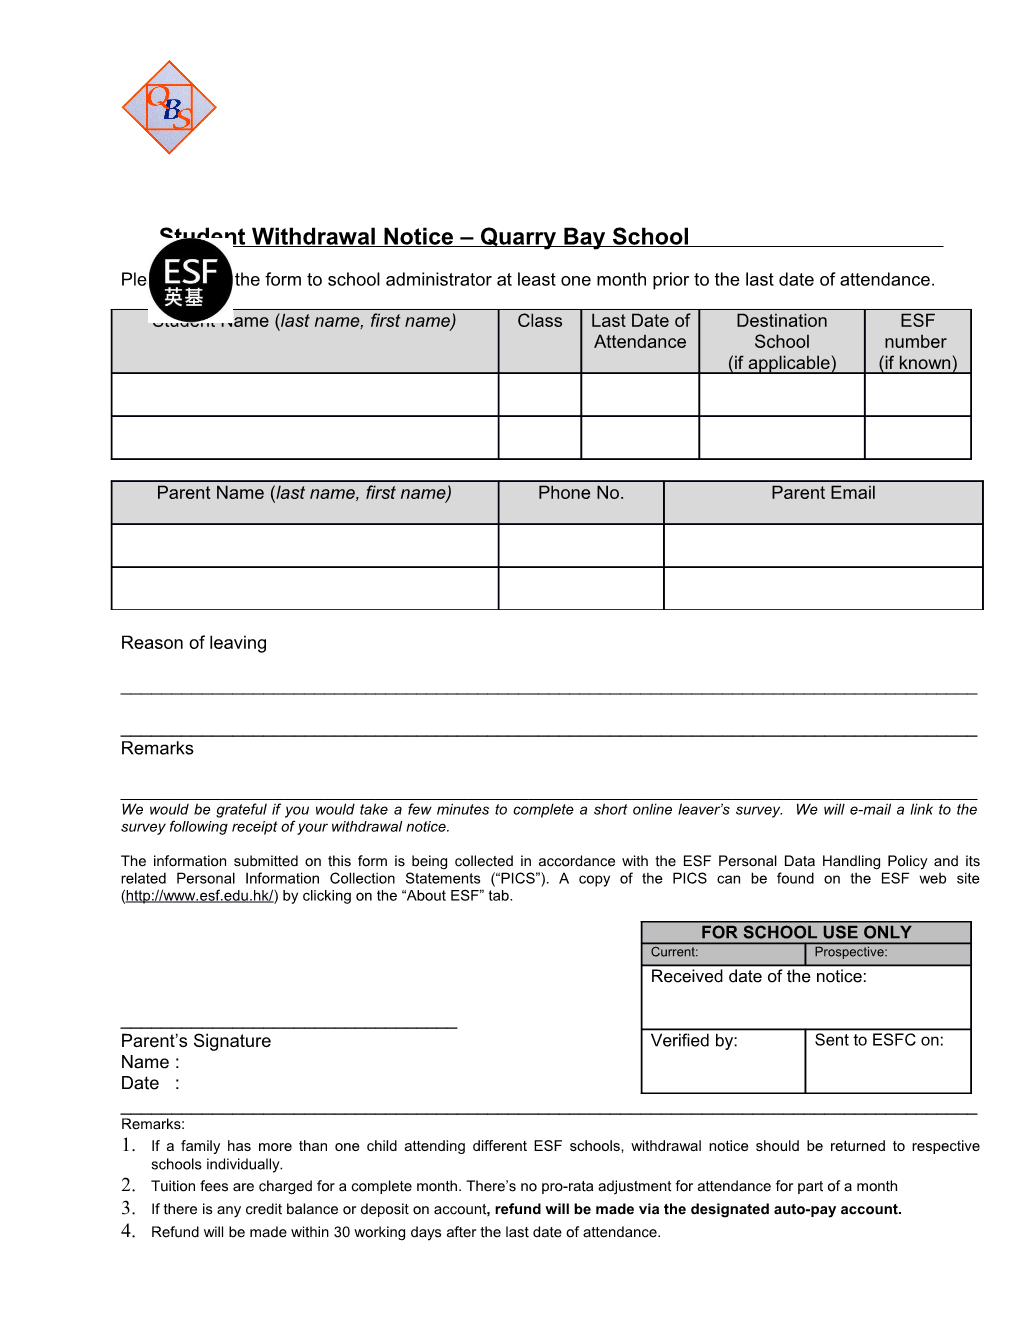 Student Withdrawal Notice Quarry Bay School